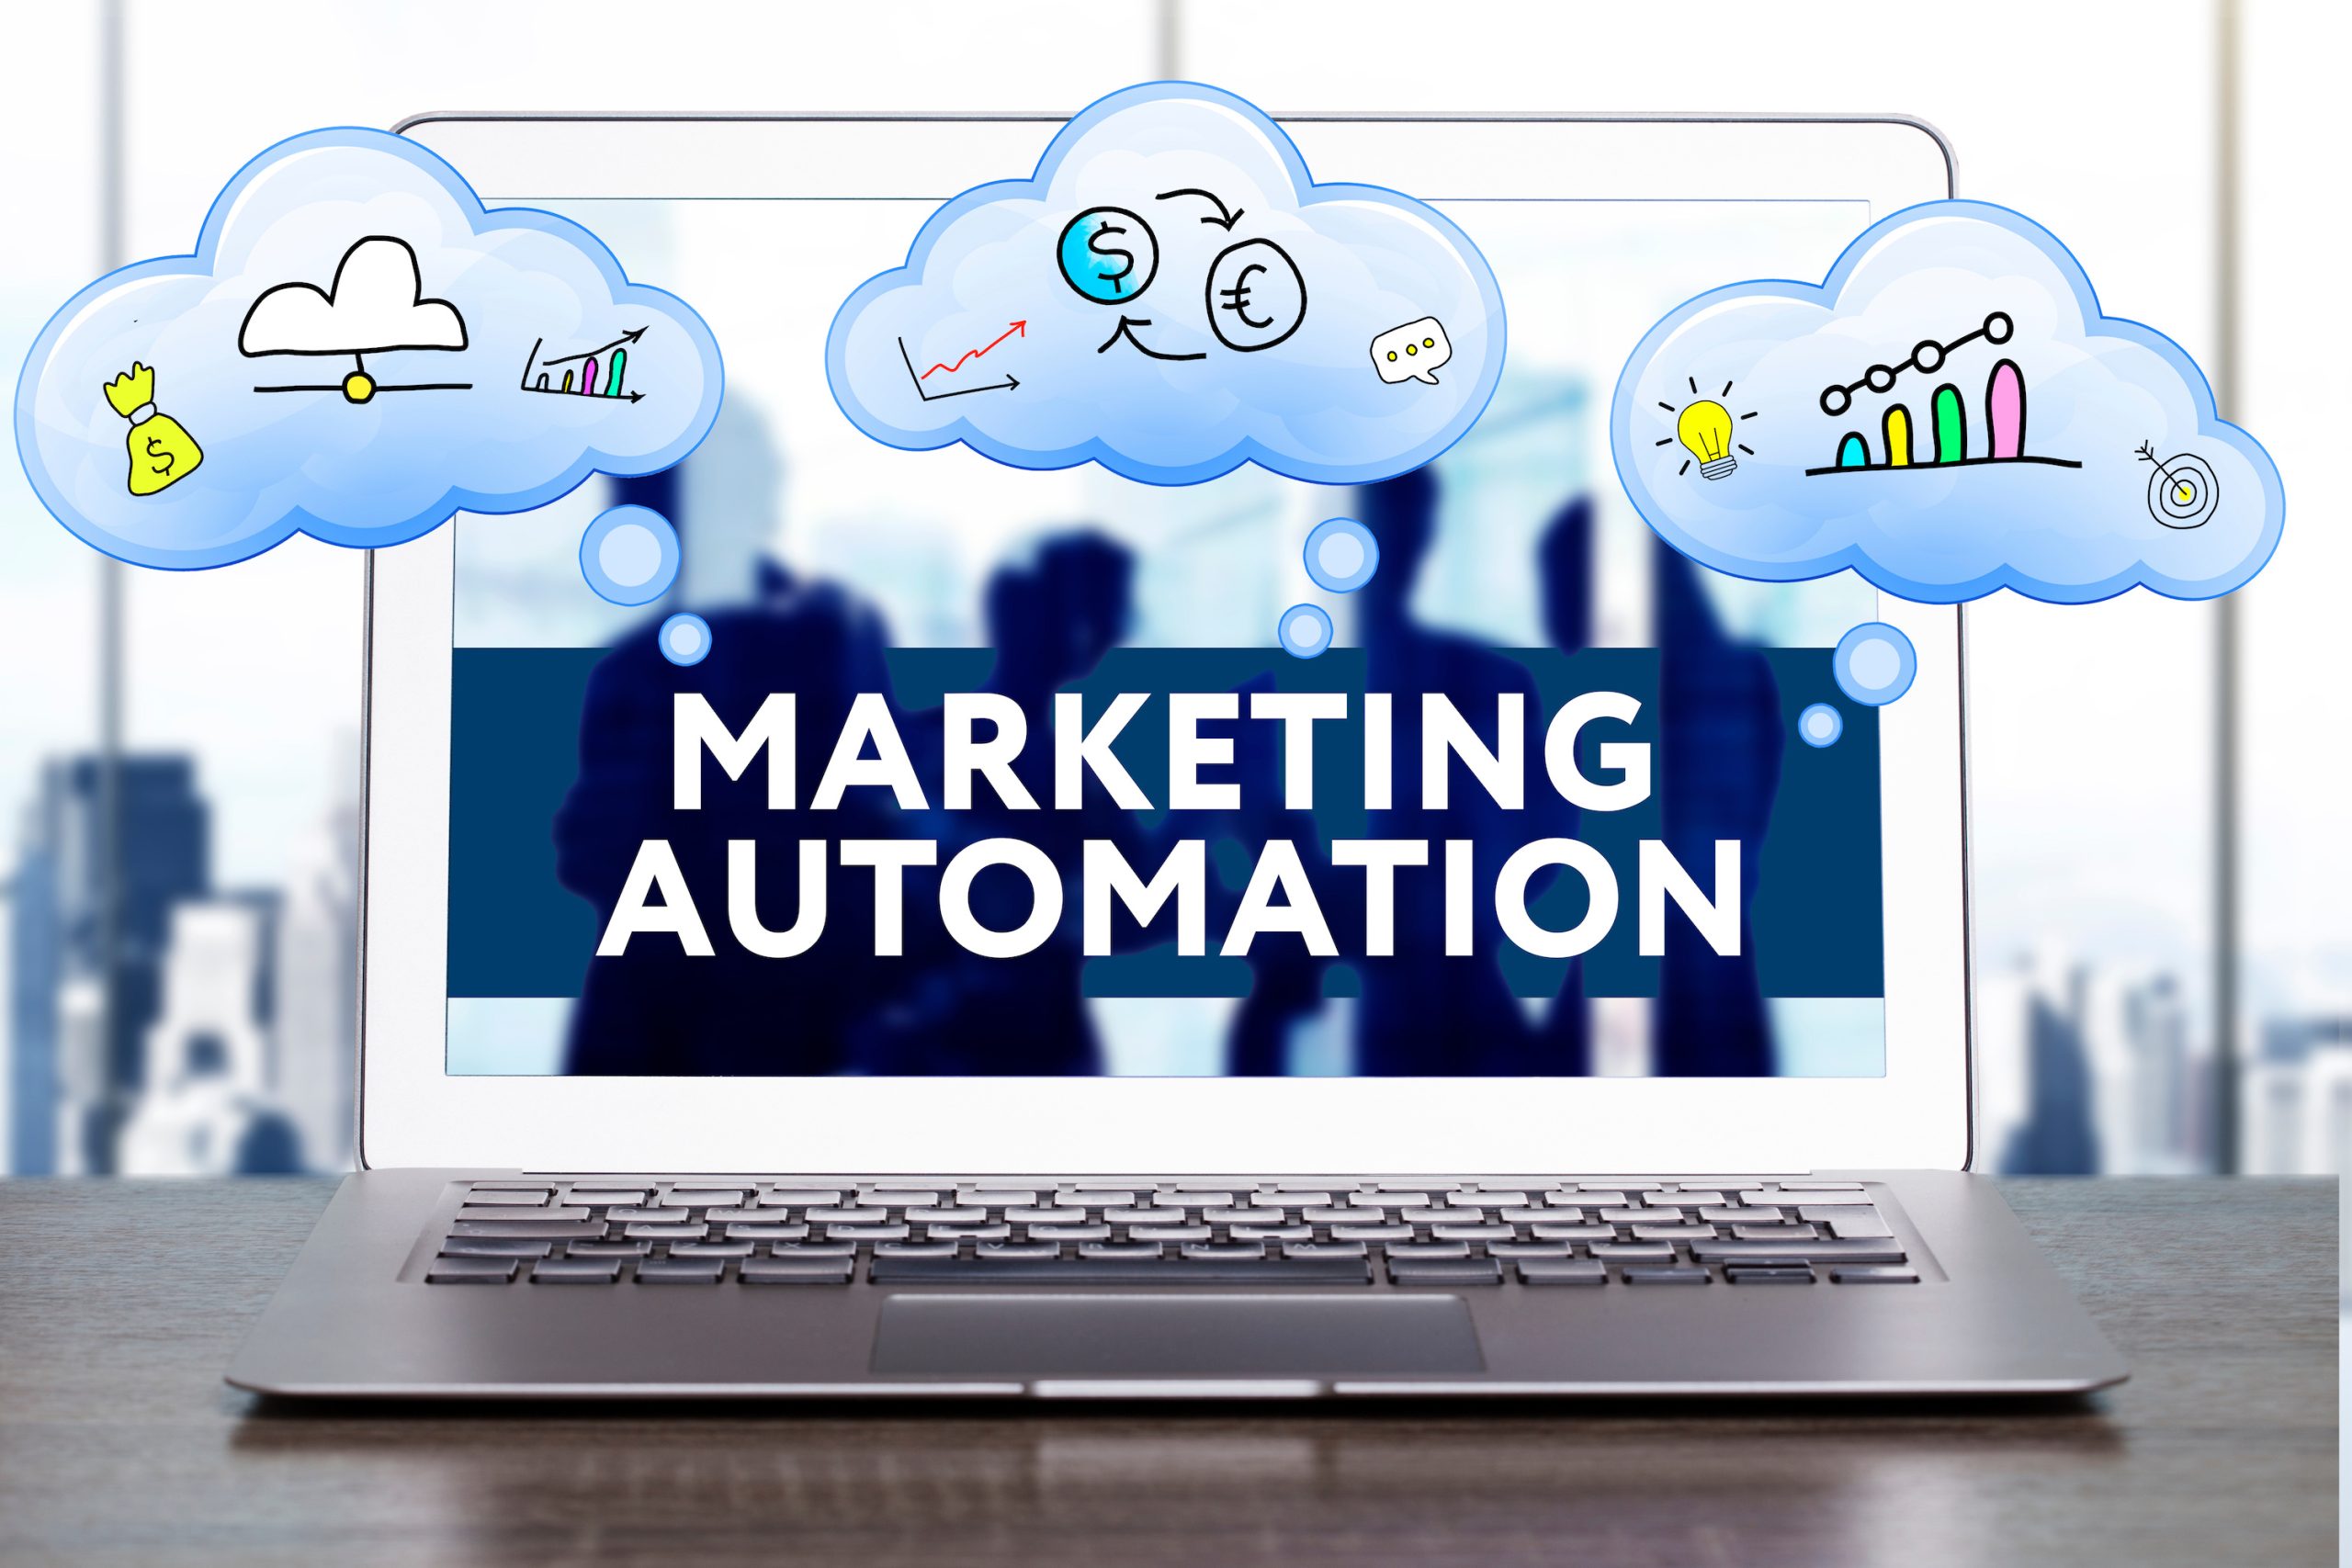 6 Ways to Use Marketing Automation for Pool & Spa Companies